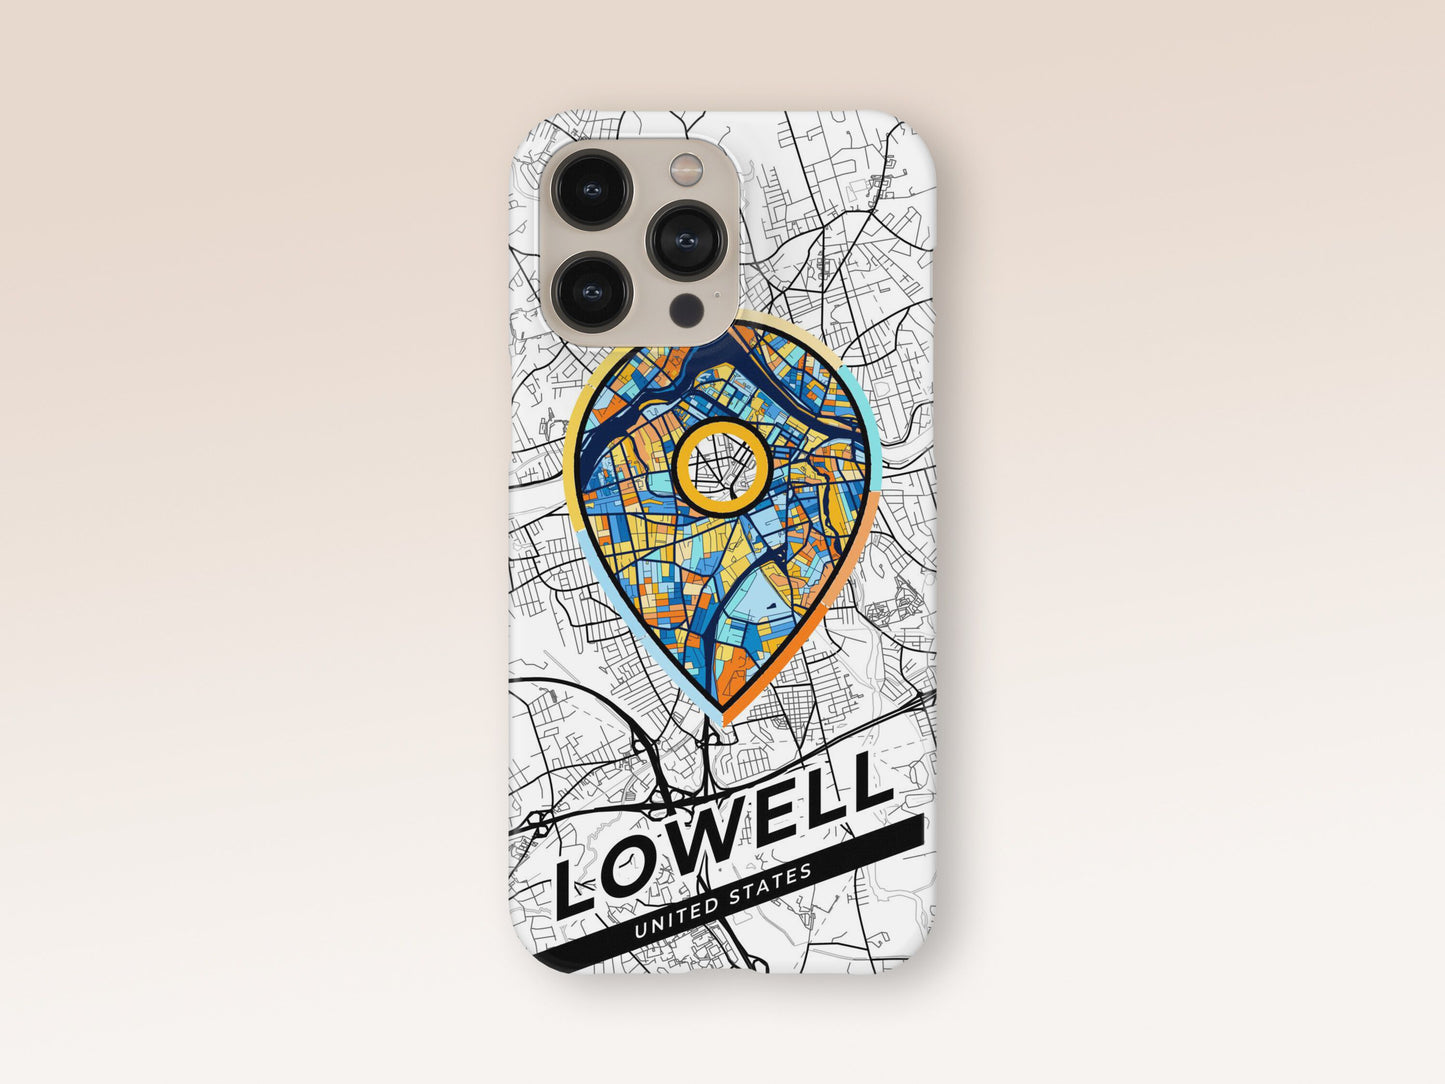 Lowell Massachusetts slim phone case with colorful icon. Birthday, wedding or housewarming gift. Couple match cases. 1